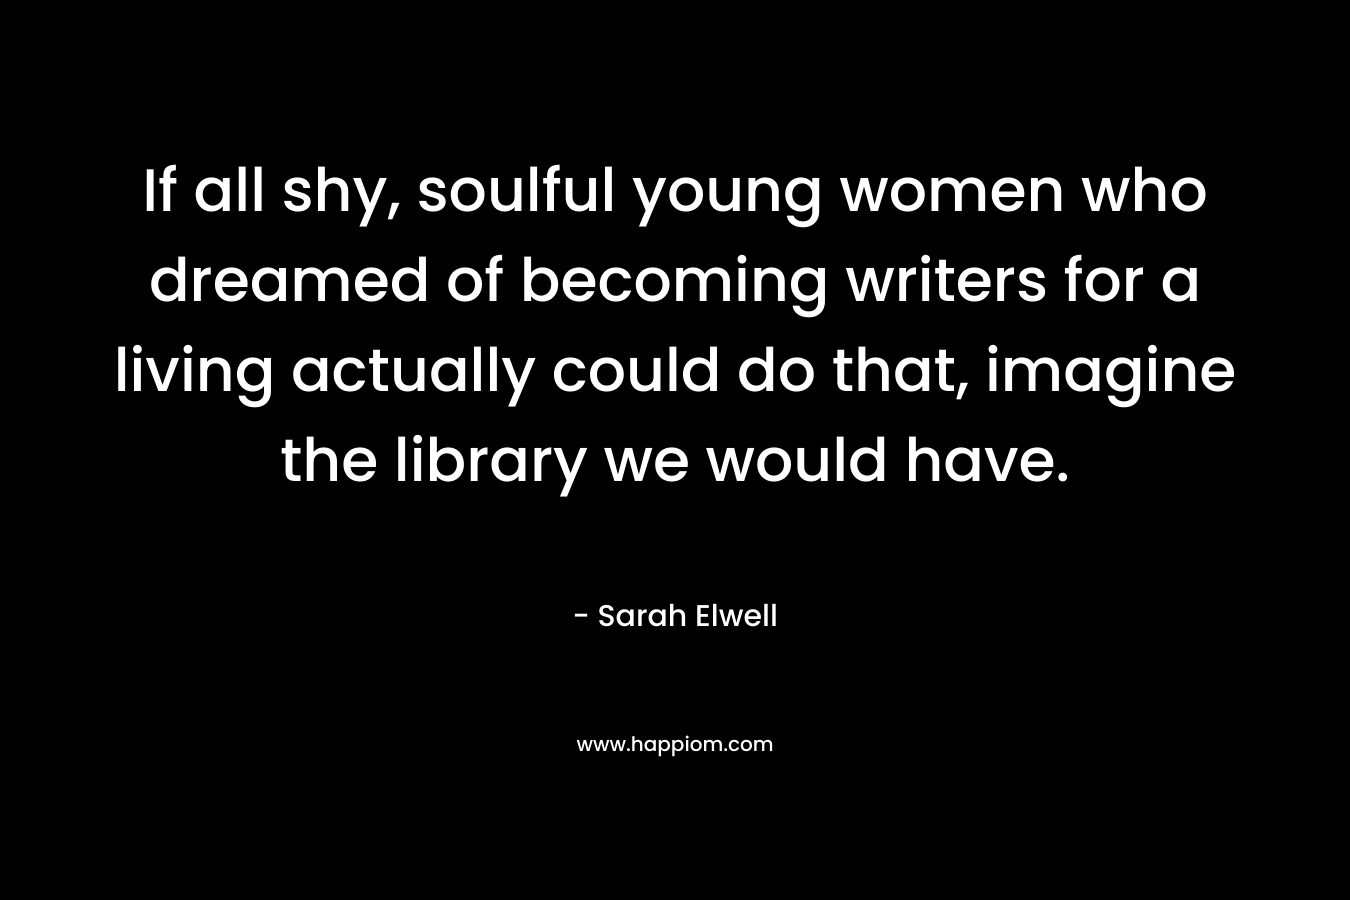 If all shy, soulful young women who dreamed of becoming writers for a living actually could do that, imagine the library we would have.